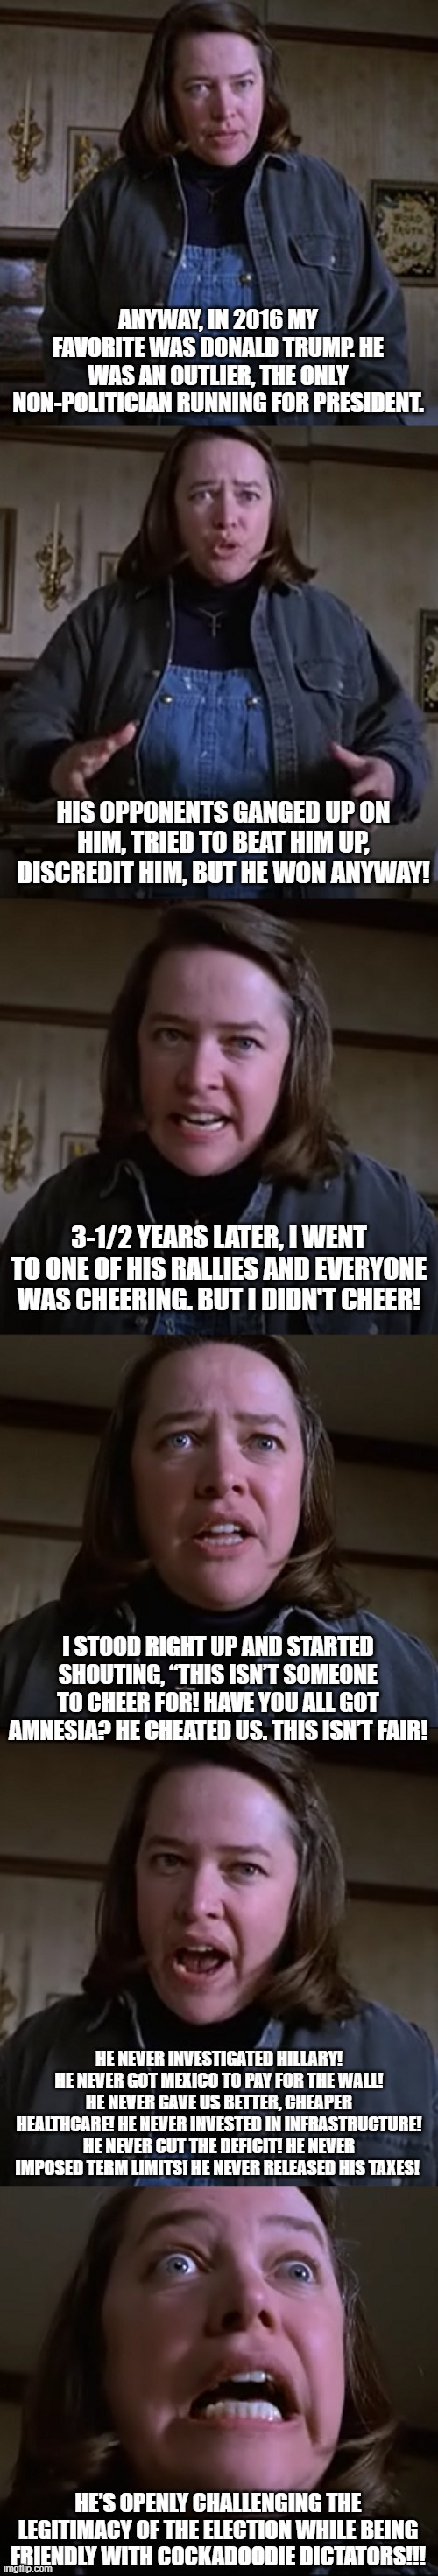 annie wilkes, former trump supporter | ANYWAY, IN 2016 MY FAVORITE WAS DONALD TRUMP. HE WAS AN OUTLIER, THE ONLY NON-POLITICIAN RUNNING FOR PRESIDENT. HIS OPPONENTS GANGED UP ON HIM, TRIED TO BEAT HIM UP, DISCREDIT HIM, BUT HE WON ANYWAY! 3-1/2 YEARS LATER, I WENT TO ONE OF HIS RALLIES AND EVERYONE WAS CHEERING. BUT I DIDN'T CHEER! I STOOD RIGHT UP AND STARTED SHOUTING, “THIS ISN’T SOMEONE TO CHEER FOR! HAVE YOU ALL GOT AMNESIA? HE CHEATED US. THIS ISN’T FAIR! HE NEVER INVESTIGATED HILLARY! HE NEVER GOT MEXICO TO PAY FOR THE WALL! HE NEVER GAVE US BETTER, CHEAPER HEALTHCARE! HE NEVER INVESTED IN INFRASTRUCTURE! HE NEVER CUT THE DEFICIT! HE NEVER IMPOSED TERM LIMITS! HE NEVER RELEASED HIS TAXES! HE’S OPENLY CHALLENGING THE LEGITIMACY OF THE ELECTION WHILE BEING FRIENDLY WITH COCKADOODIE DICTATORS!!! | image tagged in politics,funny,memes | made w/ Imgflip meme maker